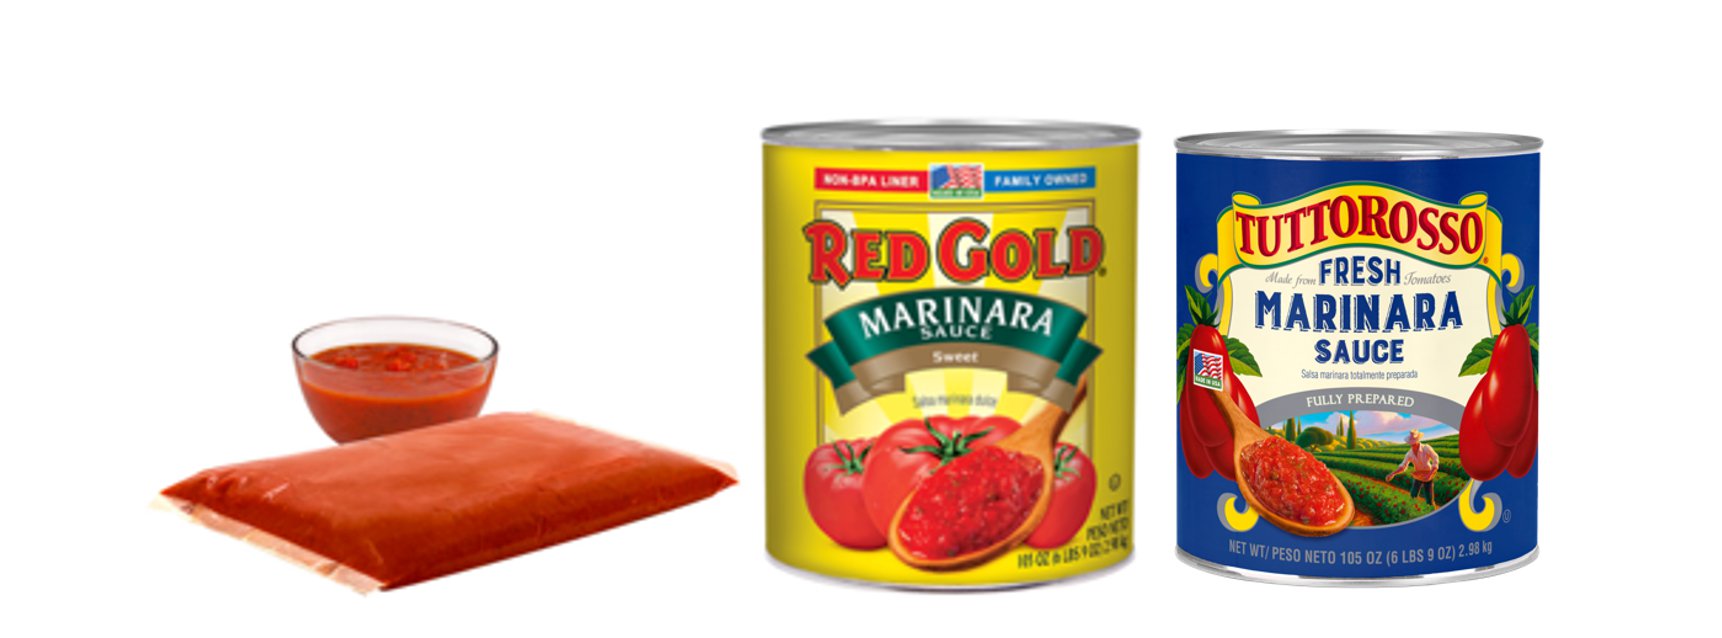 Whether it’s Redpack Spaghetti Sauce in a 105 oz. pouch or two flavors of Red Gold Spaghetti Sauce, the flavor of authentic hand-crafted goodness comes through on your plate every time.